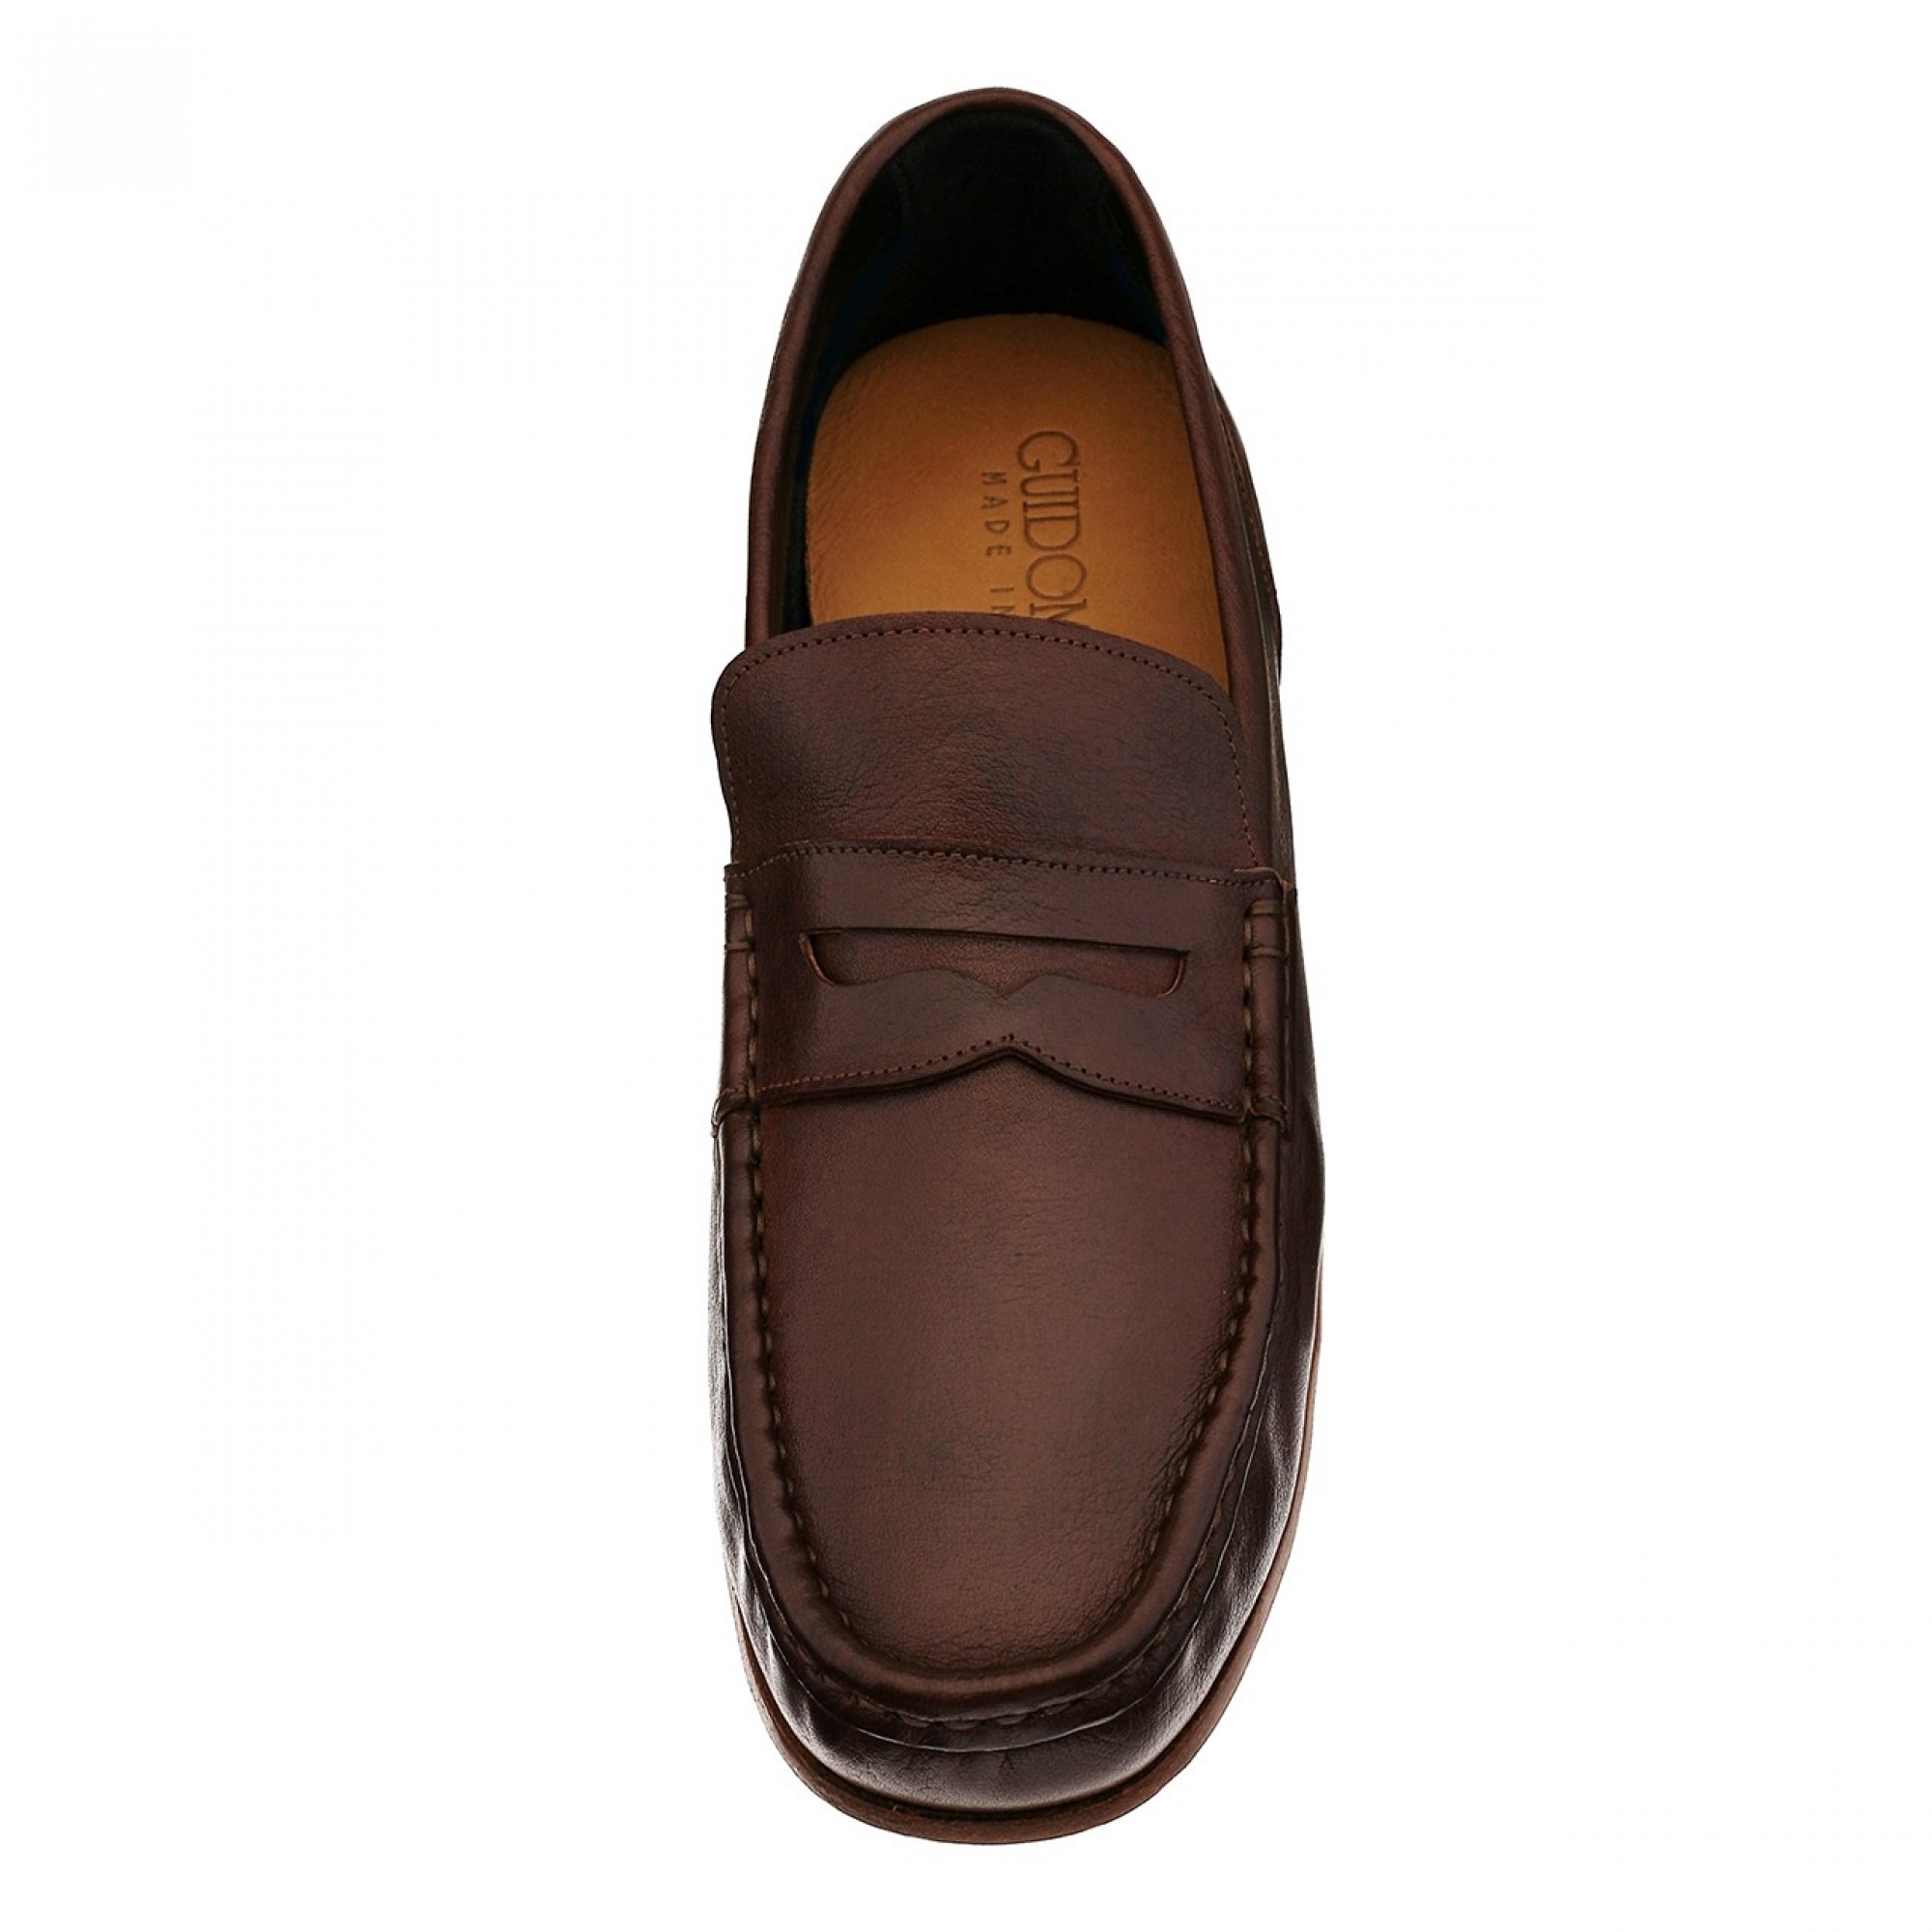 Lebanon - Elevator Loafers in Cordovan Leather up to 6 cm